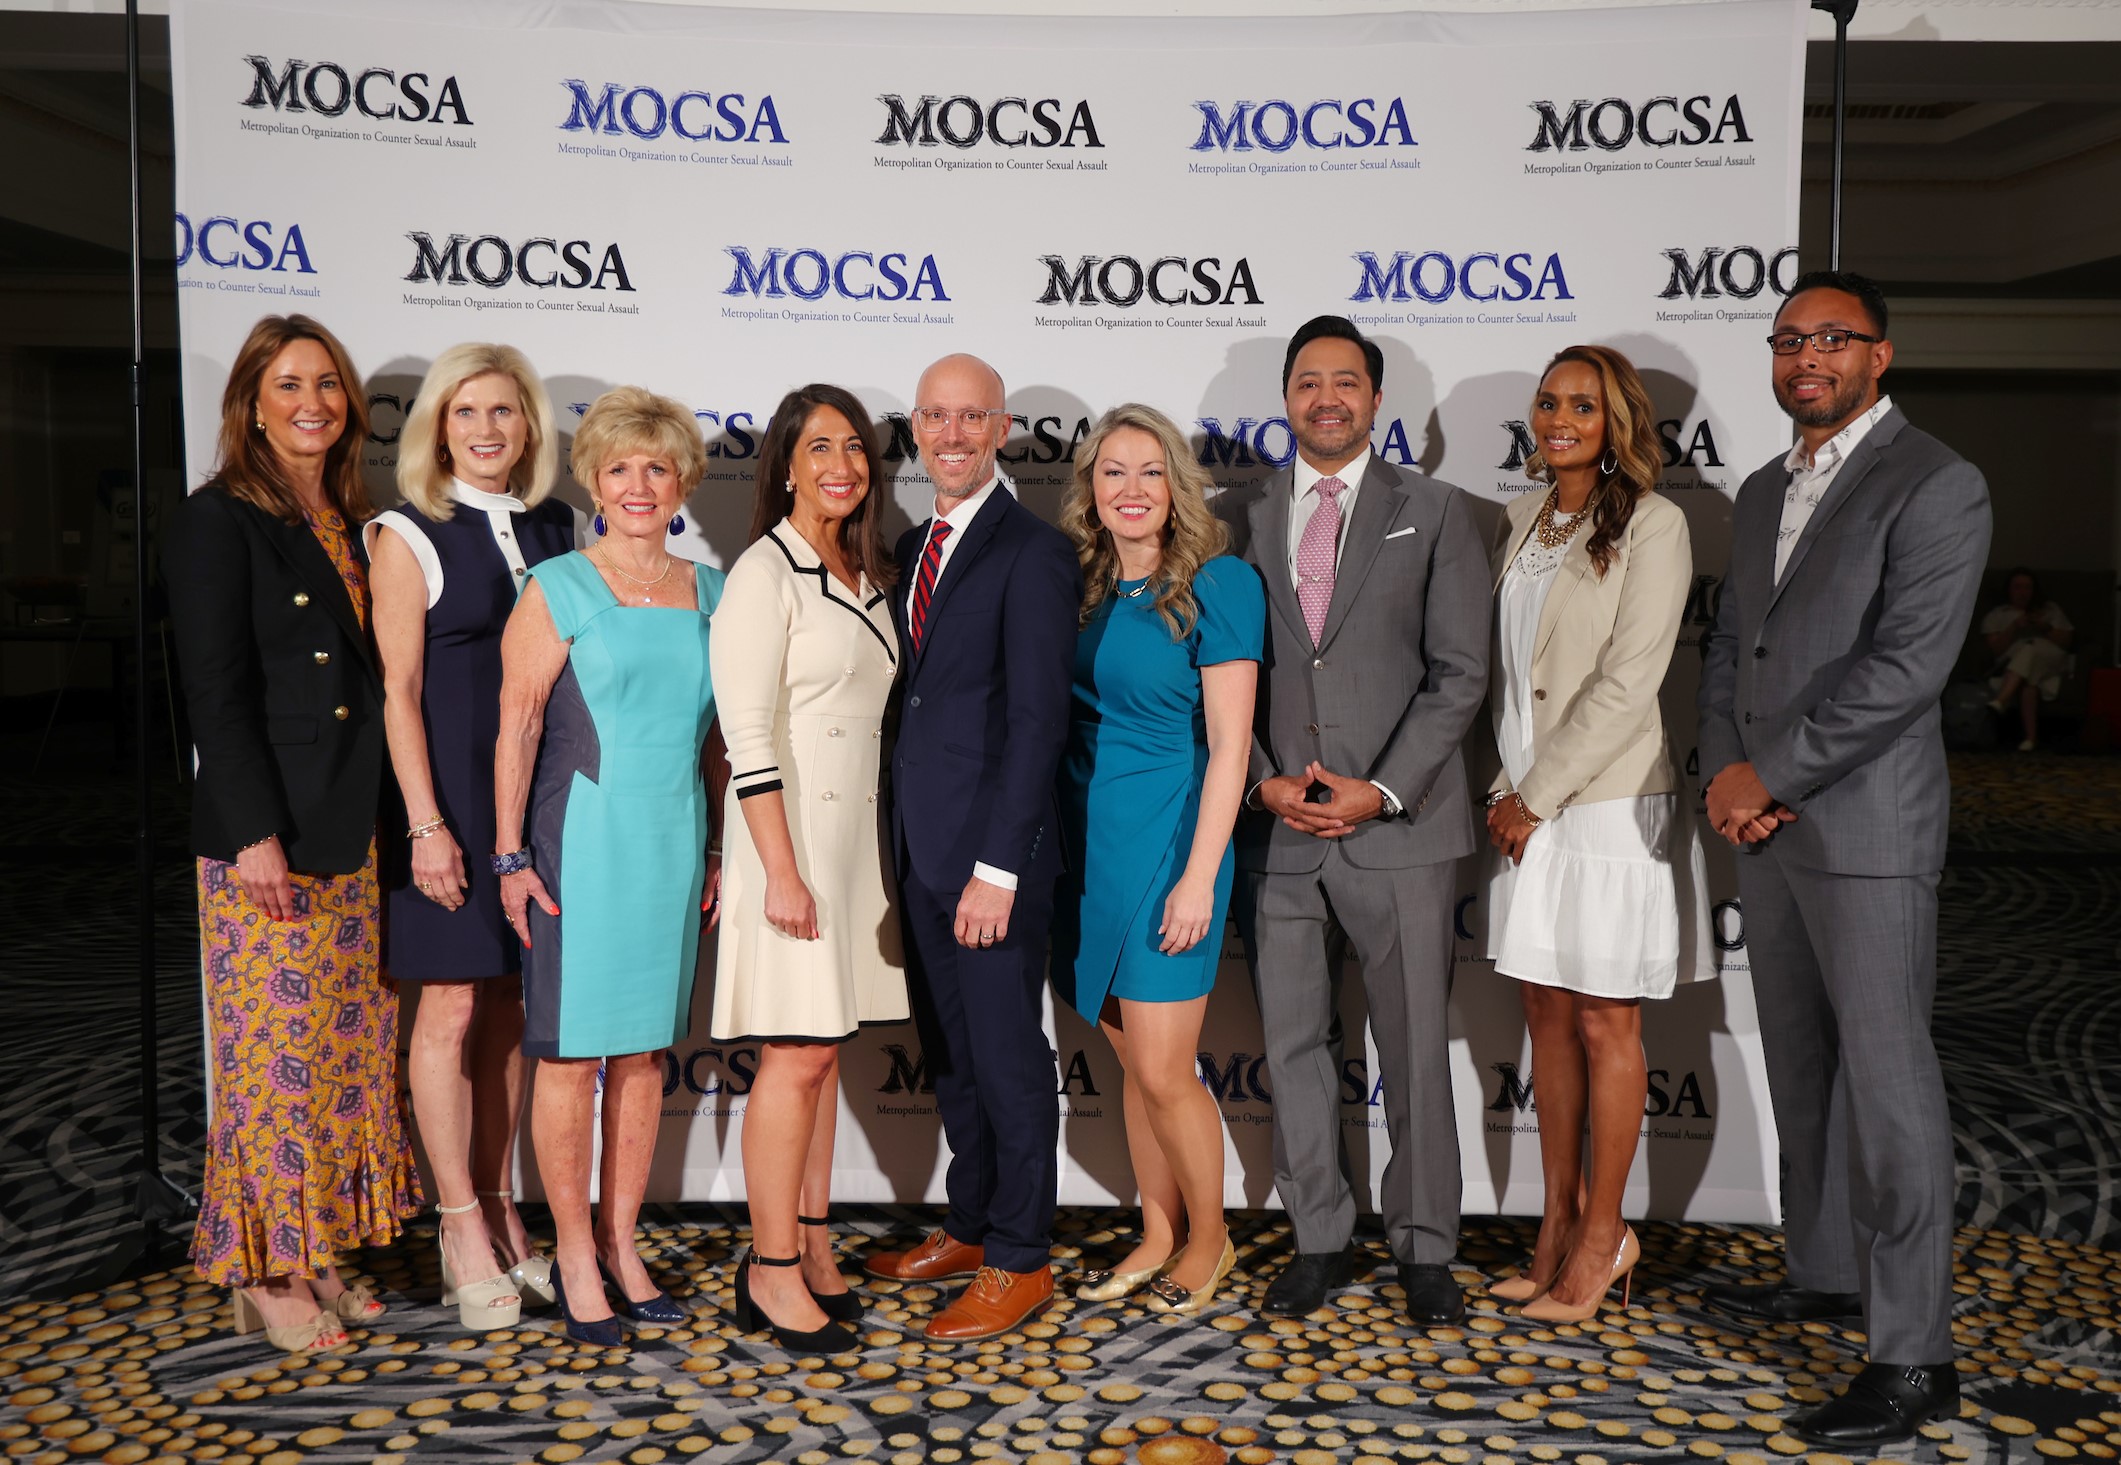 MOCSA President & CEO Julie Donelon, Honorary Chairs Heather Bortnick & Kathy Koehler, Community Support Committee Co-Chairs Leah & Arlan Vomhof, Holly Garber & Sujal Shah, Event Co-Chairs Monica Gray & Chris Gray.